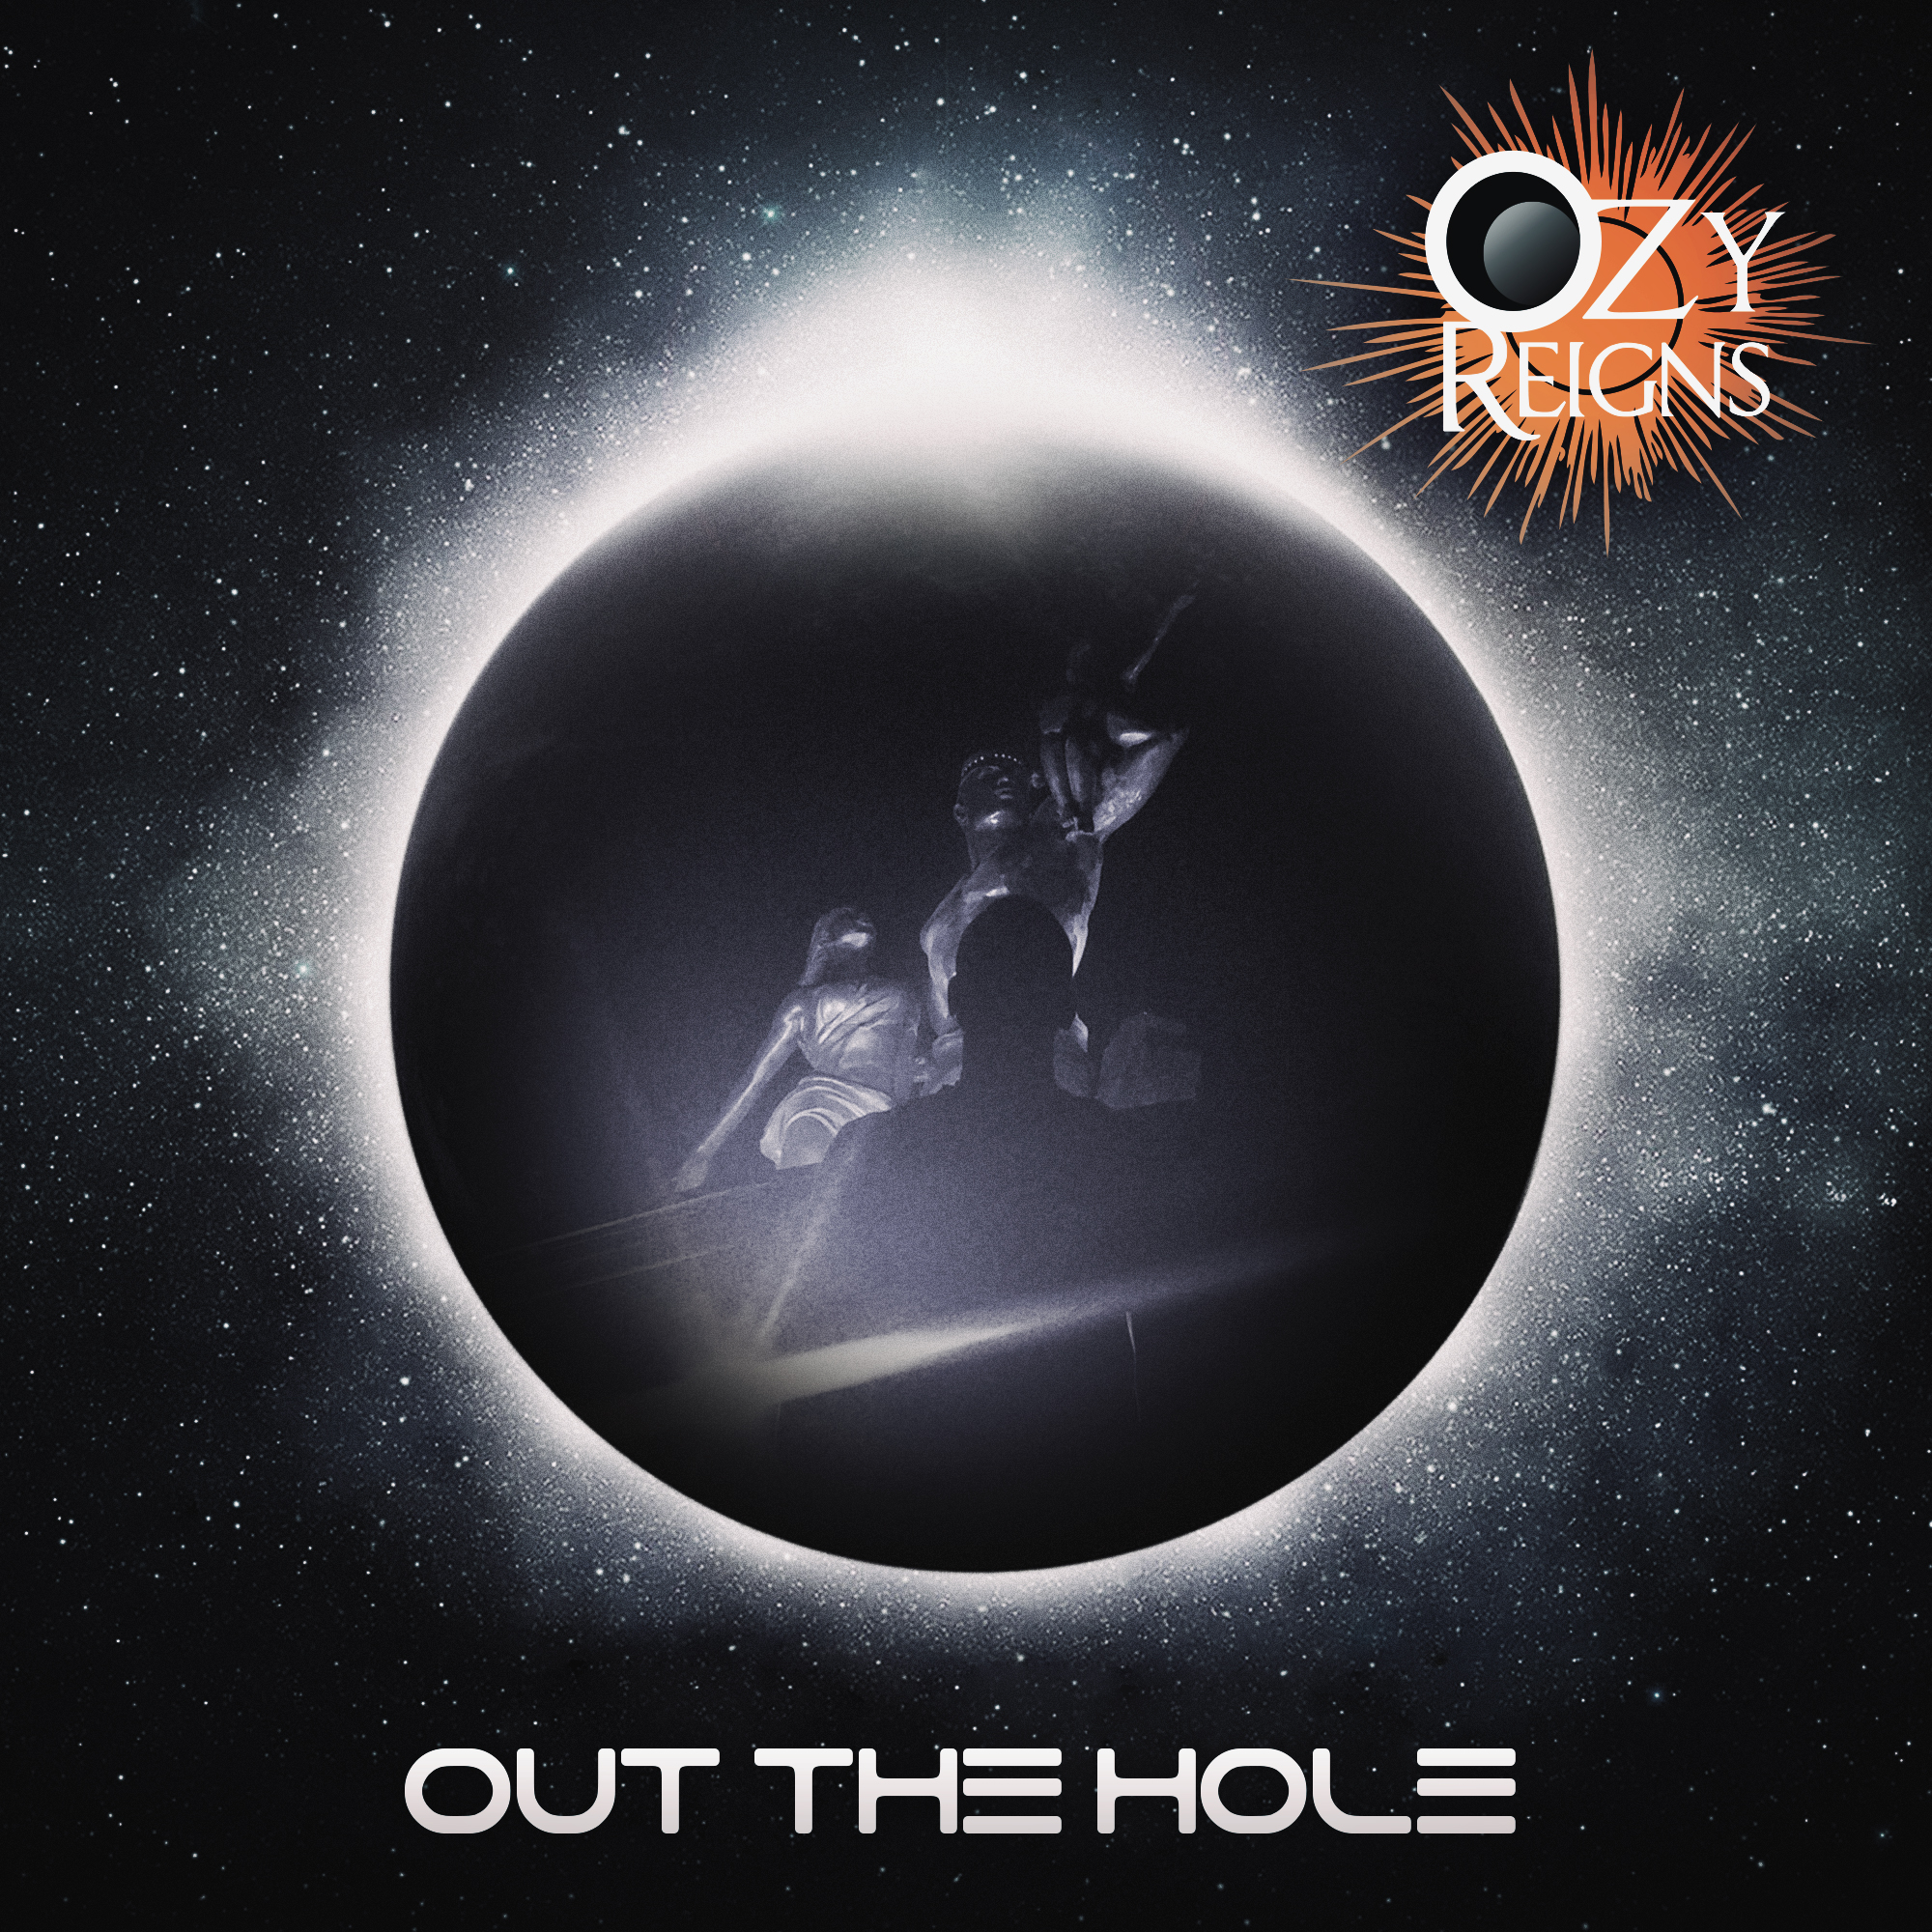 [SODD PREMIERE] Ozy Reigns “Out The Hole” (VIDEO)